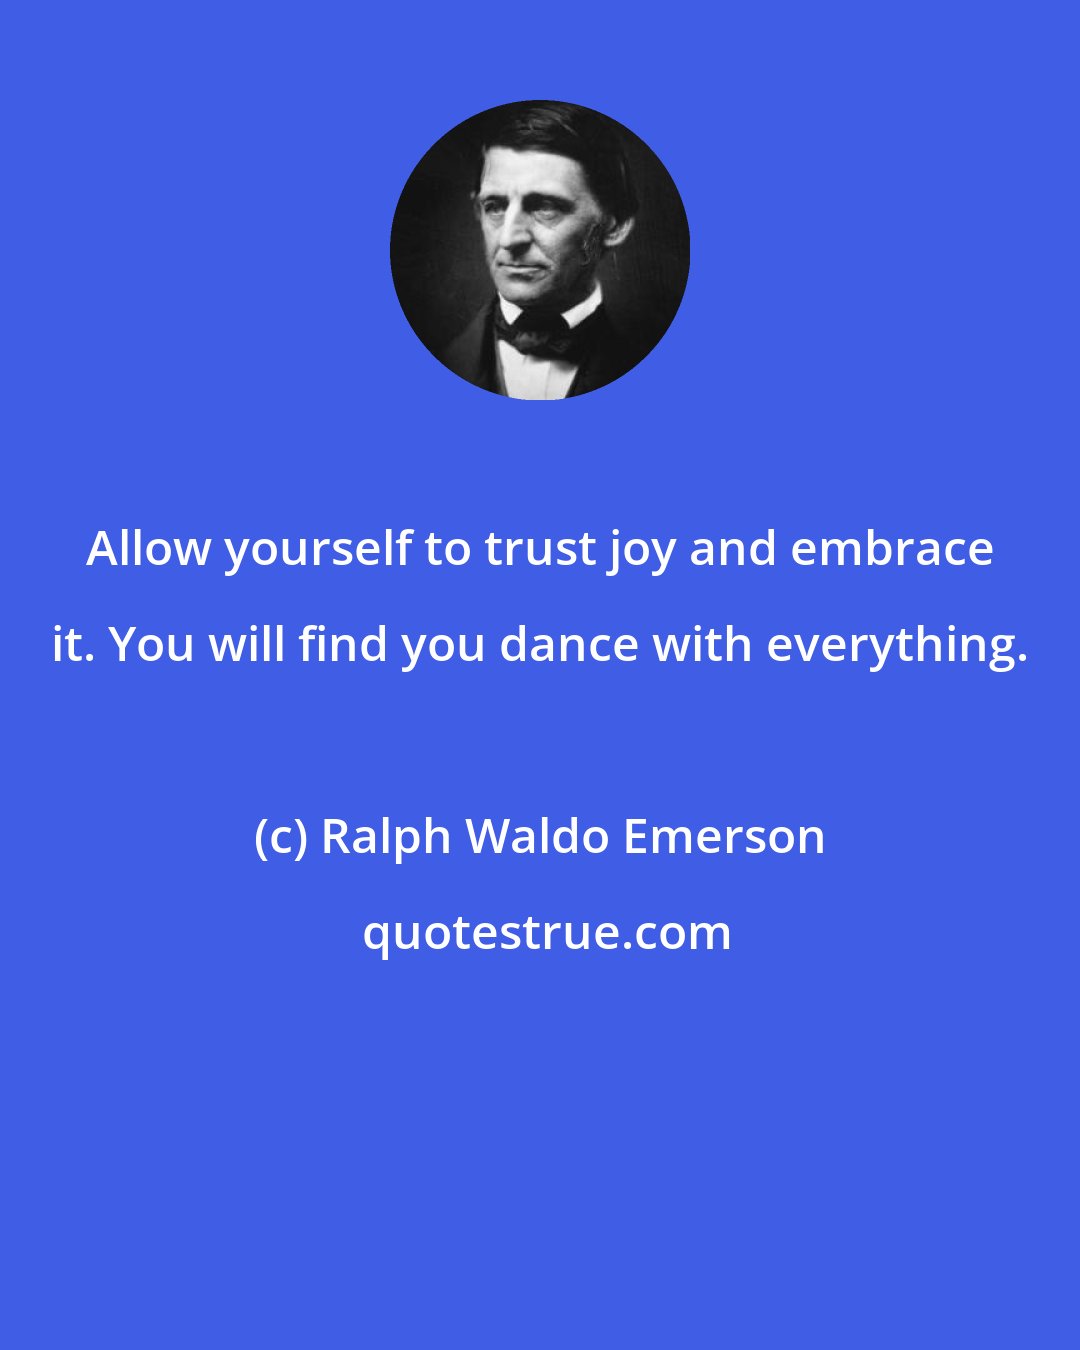 Ralph Waldo Emerson: Allow yourself to trust joy and embrace it. You will find you dance with everything.